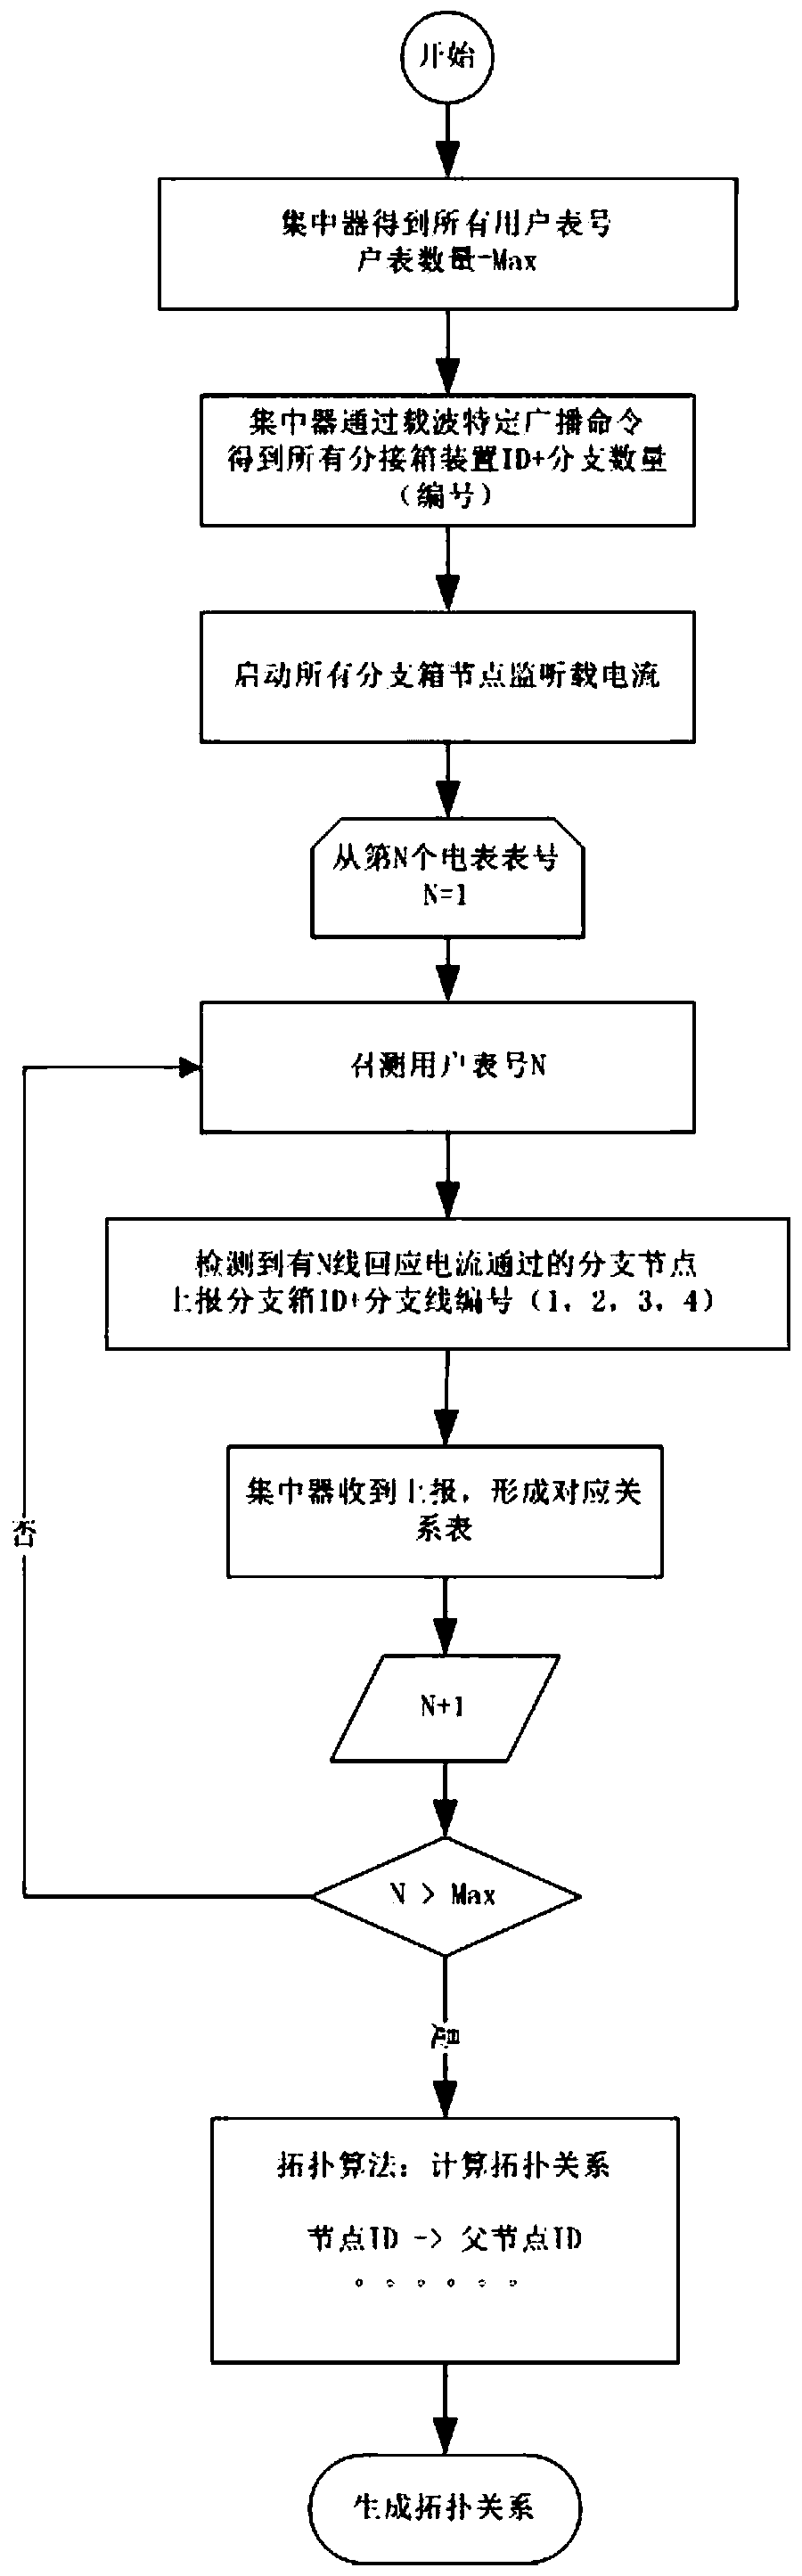 Low-voltage distribution network topology identification system and method based on power line carrier N-line current monitoring